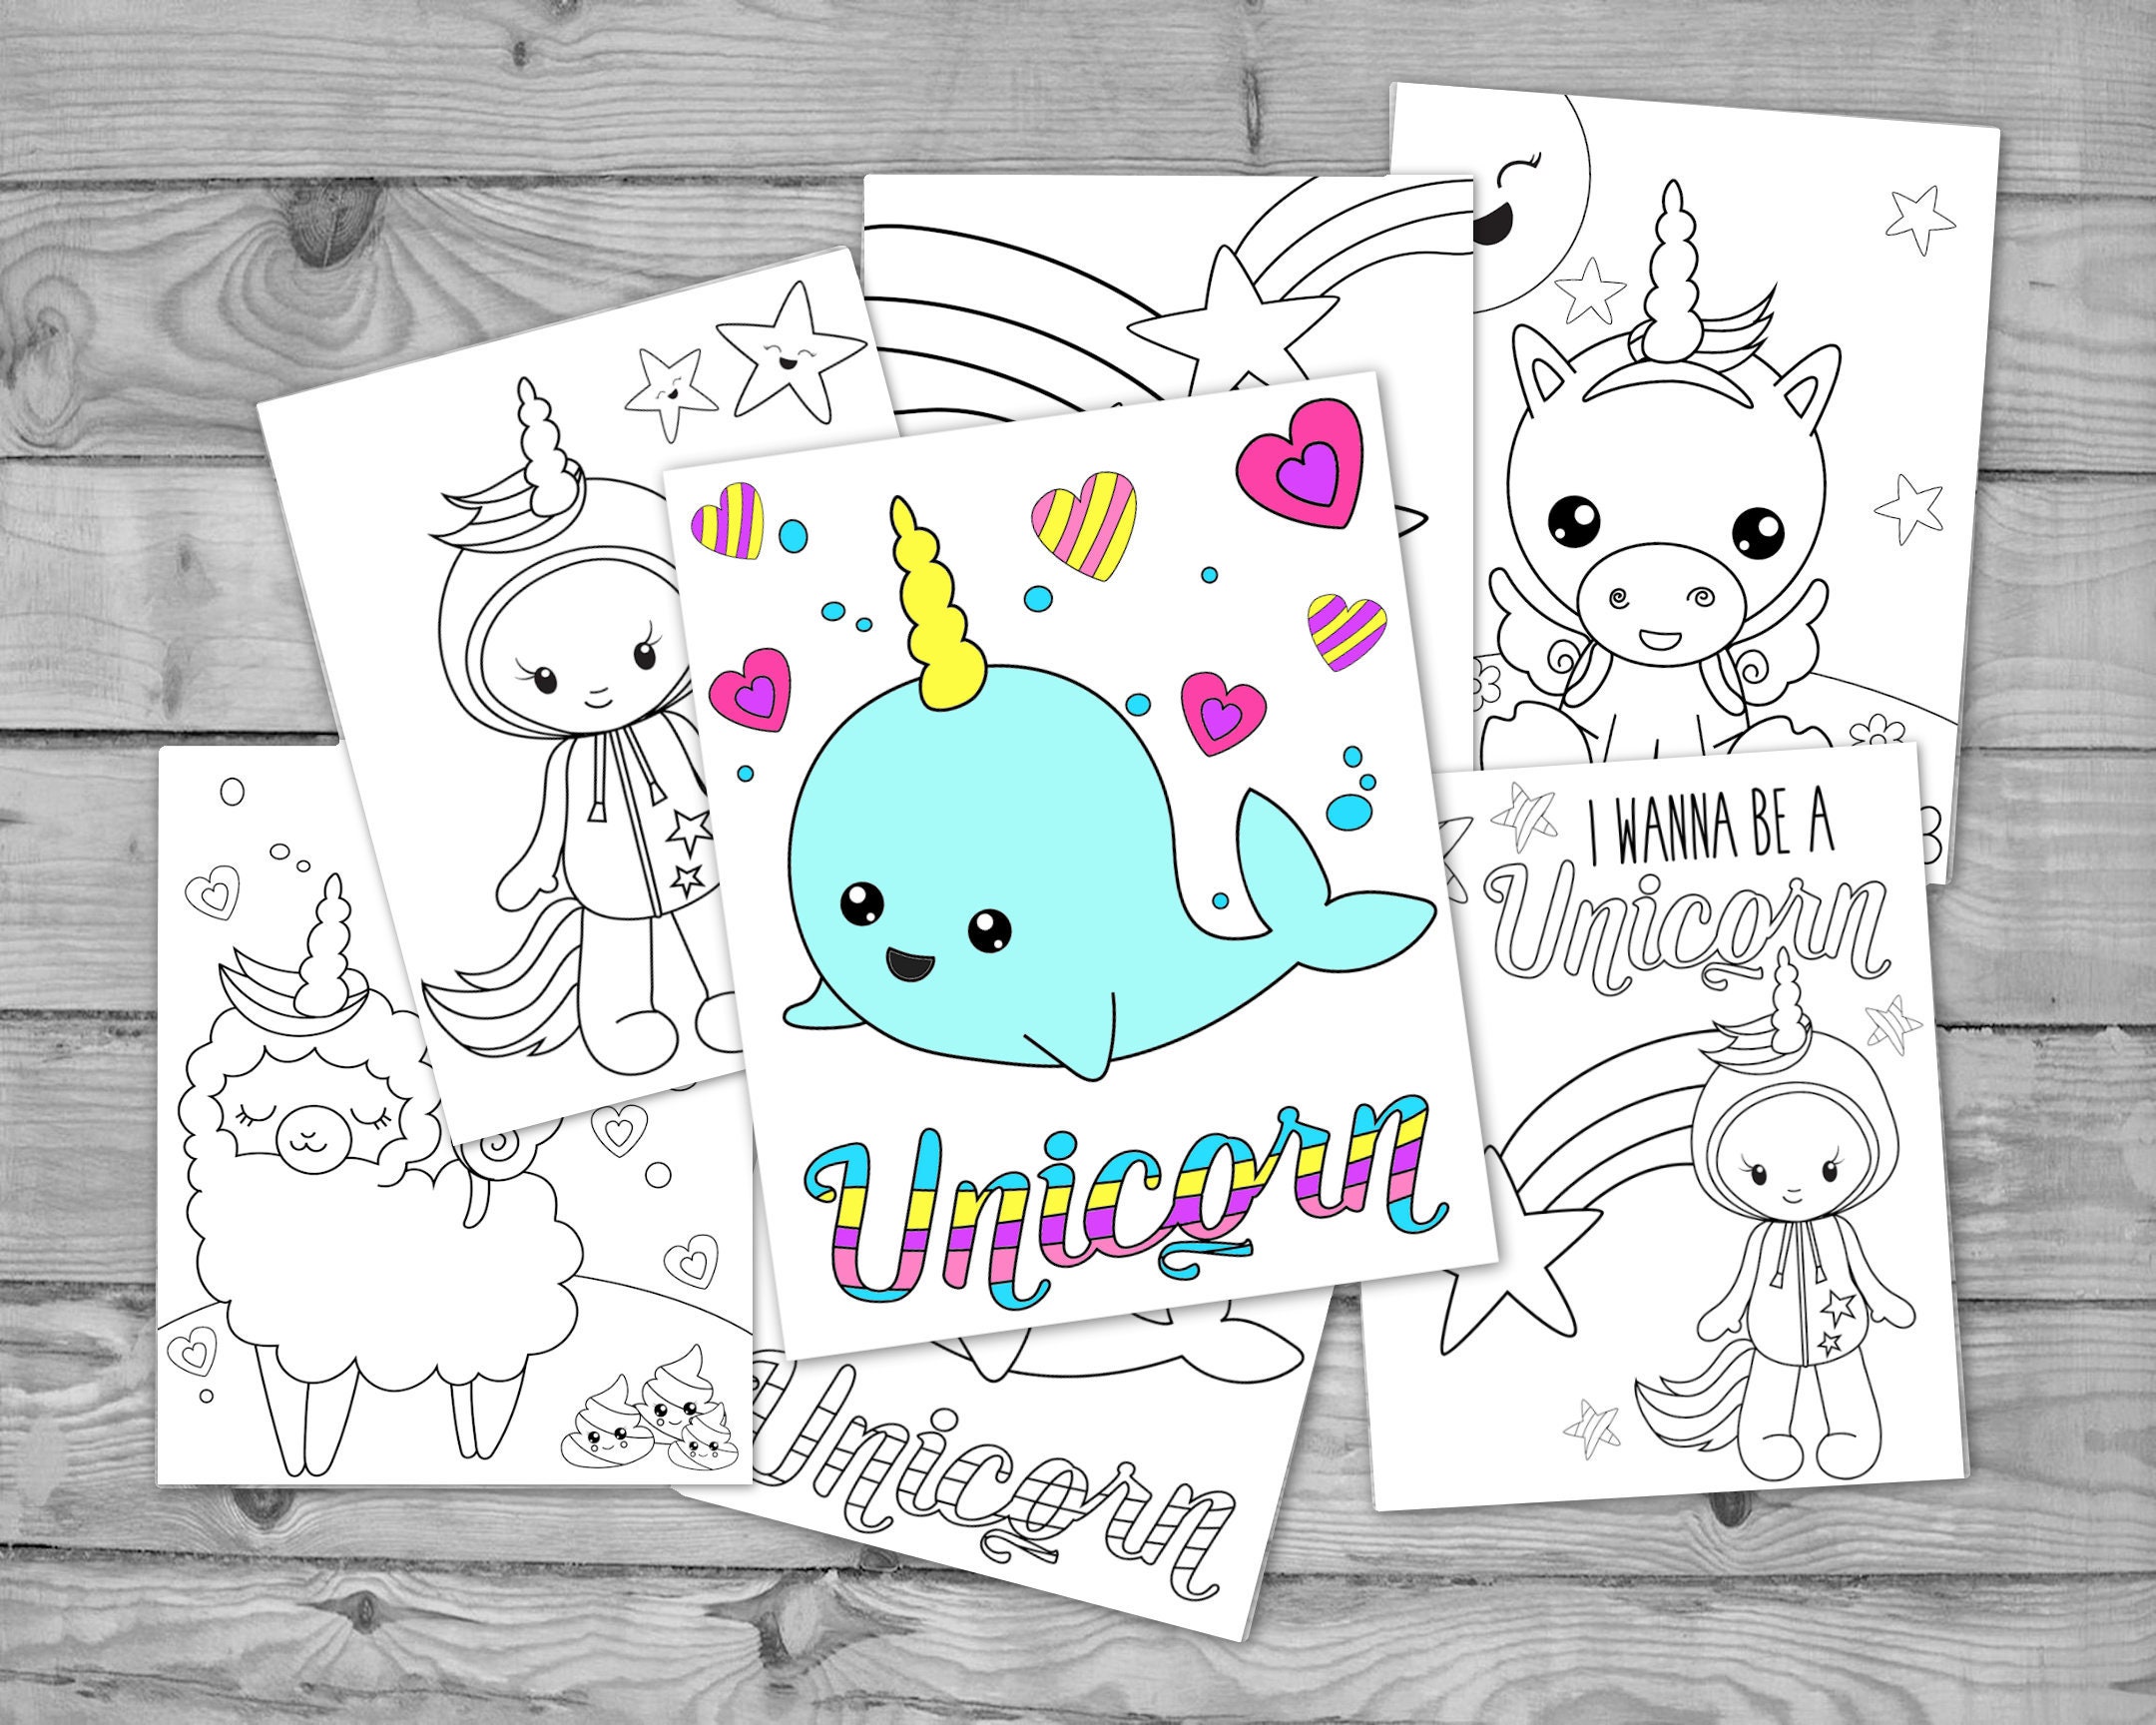 Unicorn pictures to color: Unicorn copy and colour - KiddyCharts Shop